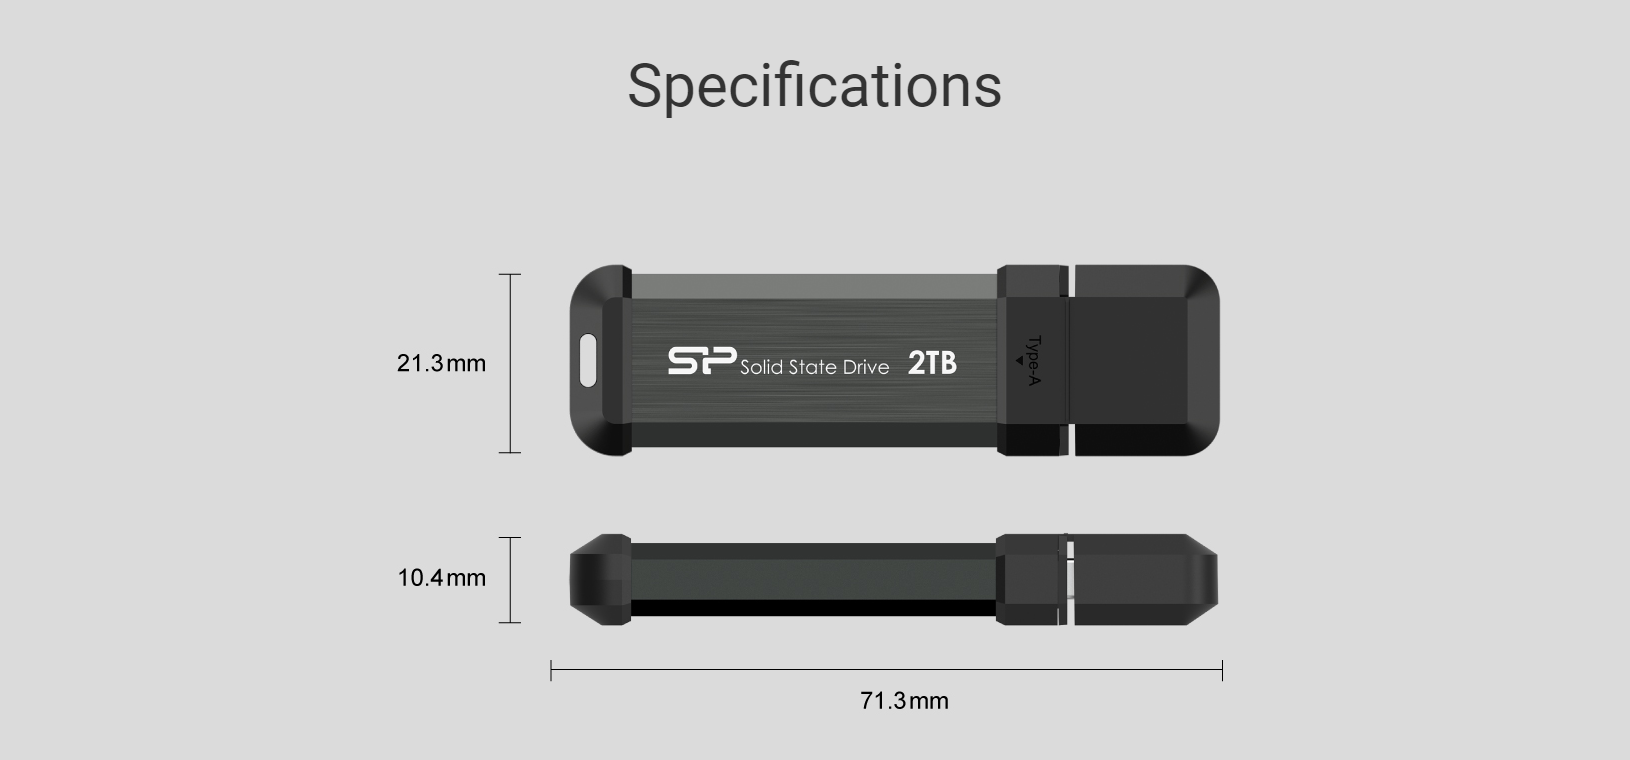 A large marketing image providing additional information about the product Silicon Power MS70 1TB USB 3.2 Gen 2 SSD Flash Drive - Gray - Additional alt info not provided